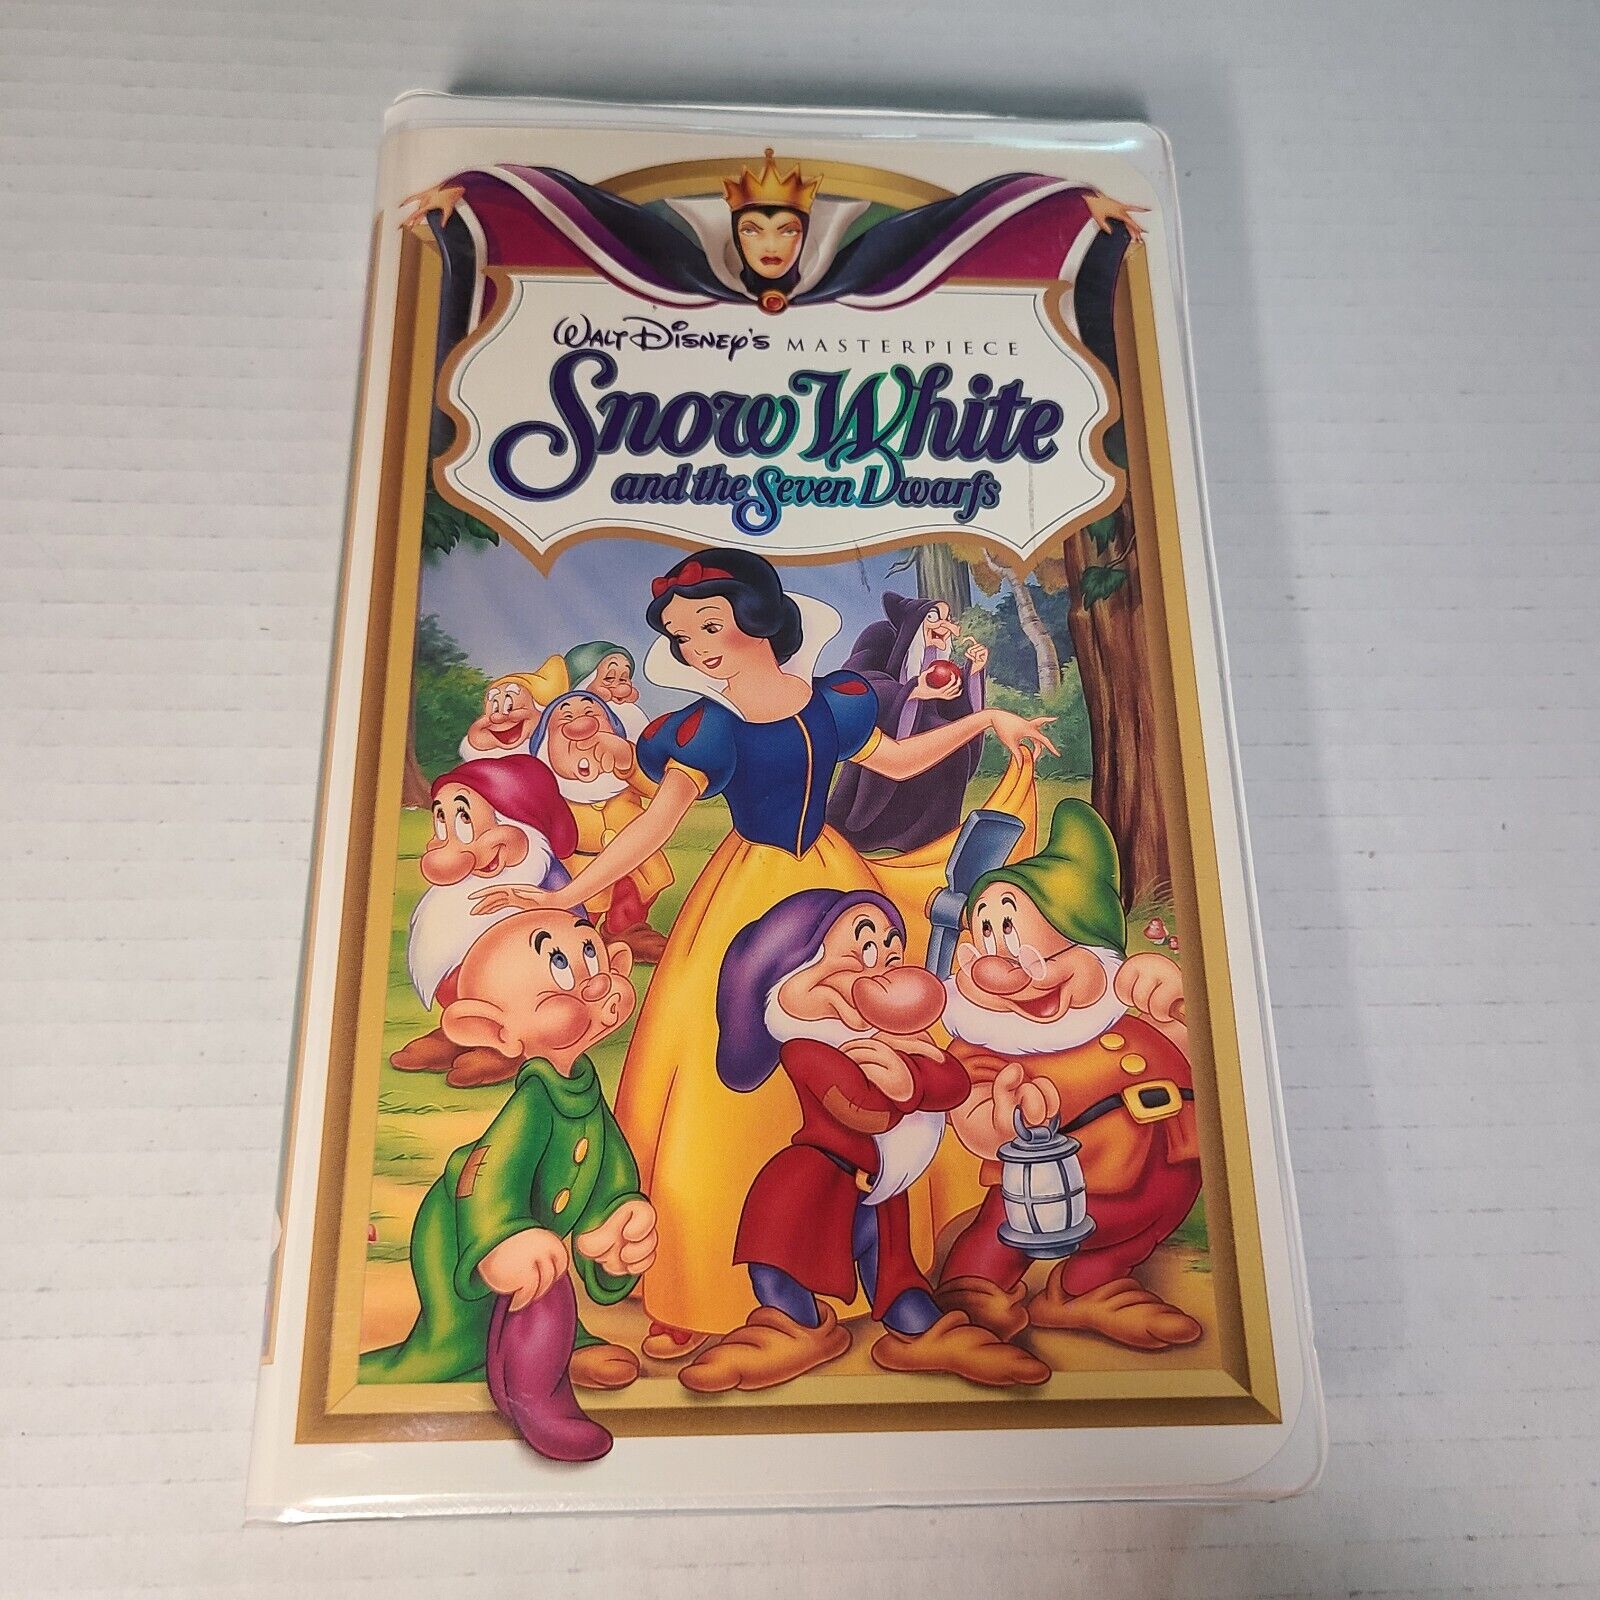 Disney\'s Snow White and the Seven Dwarfs (VHS, 1937) Masterpiece Collection